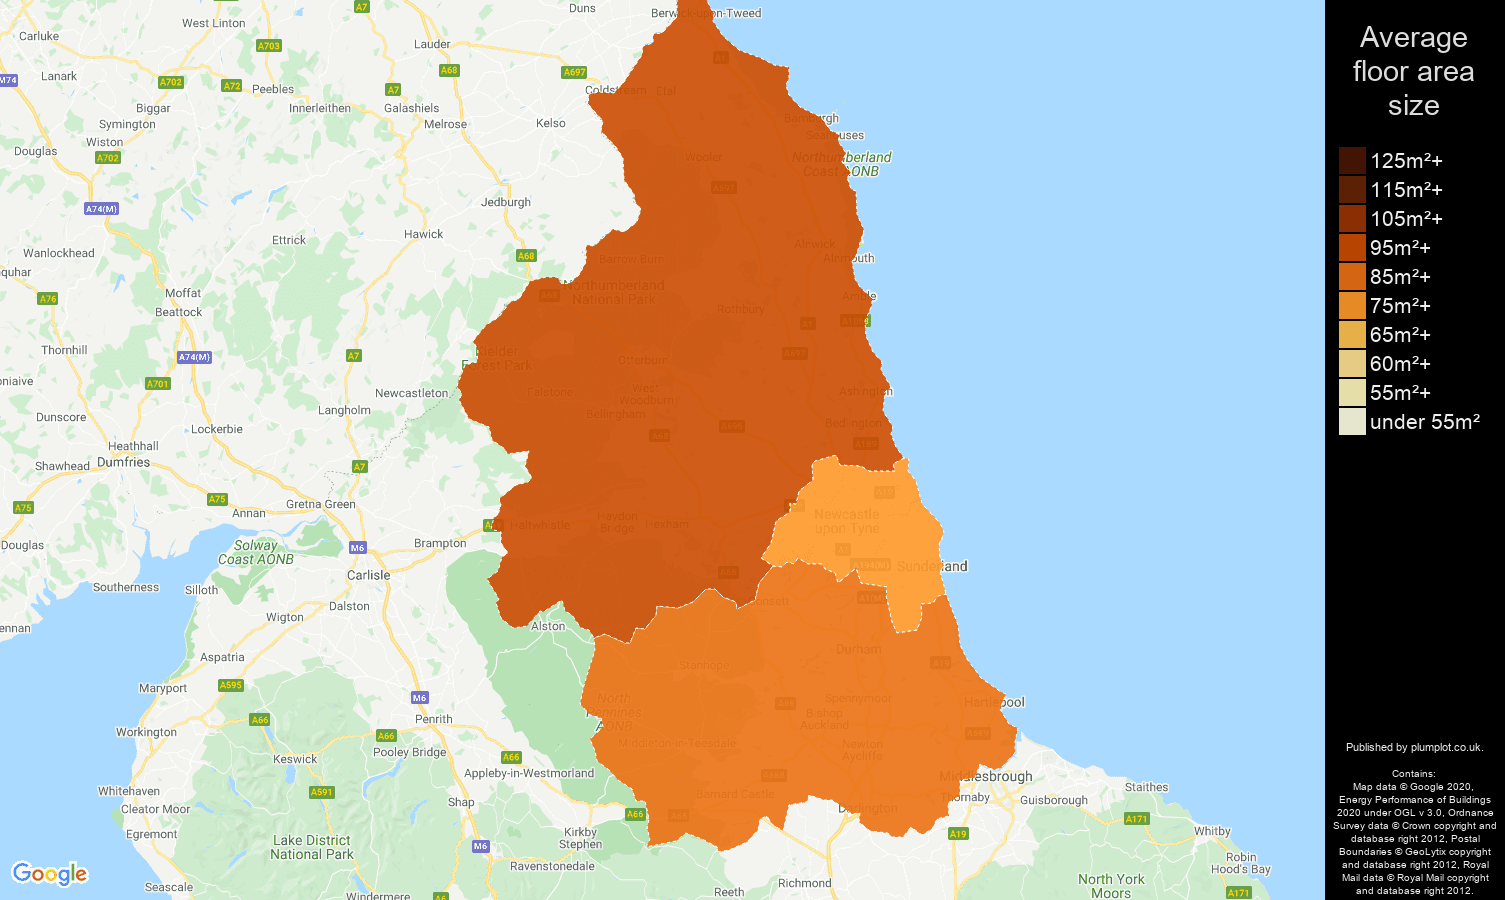 North East map of average floor area size of properties